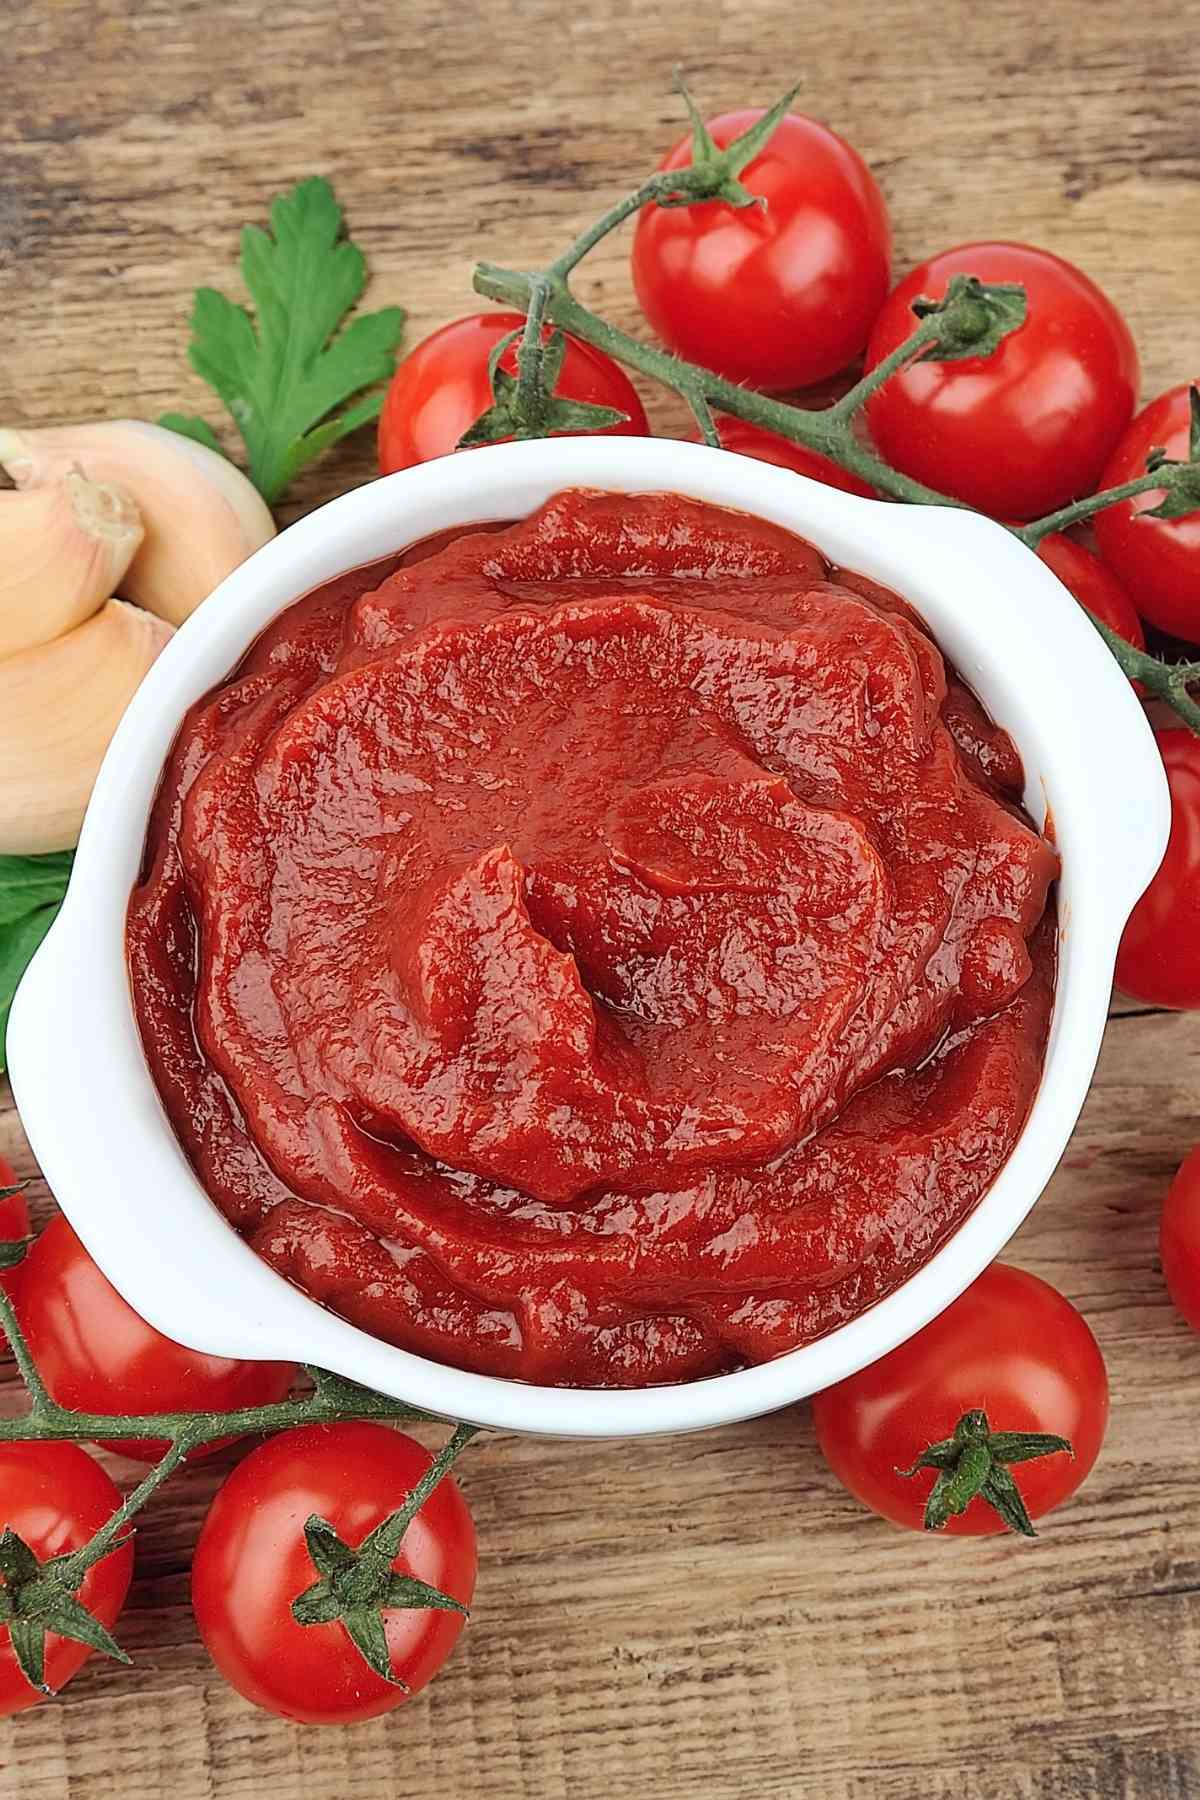 Tomato paste is a convenient and popular ingredient in many Italian dishes. It also adds a deep and rich umami flavor to soups, stews, and casseroles. But what if you’ve run out of tomato paste while preparing a meal? Save yourself a last-minute trip to the grocery store with these simple Tomato Paste Substitutes.